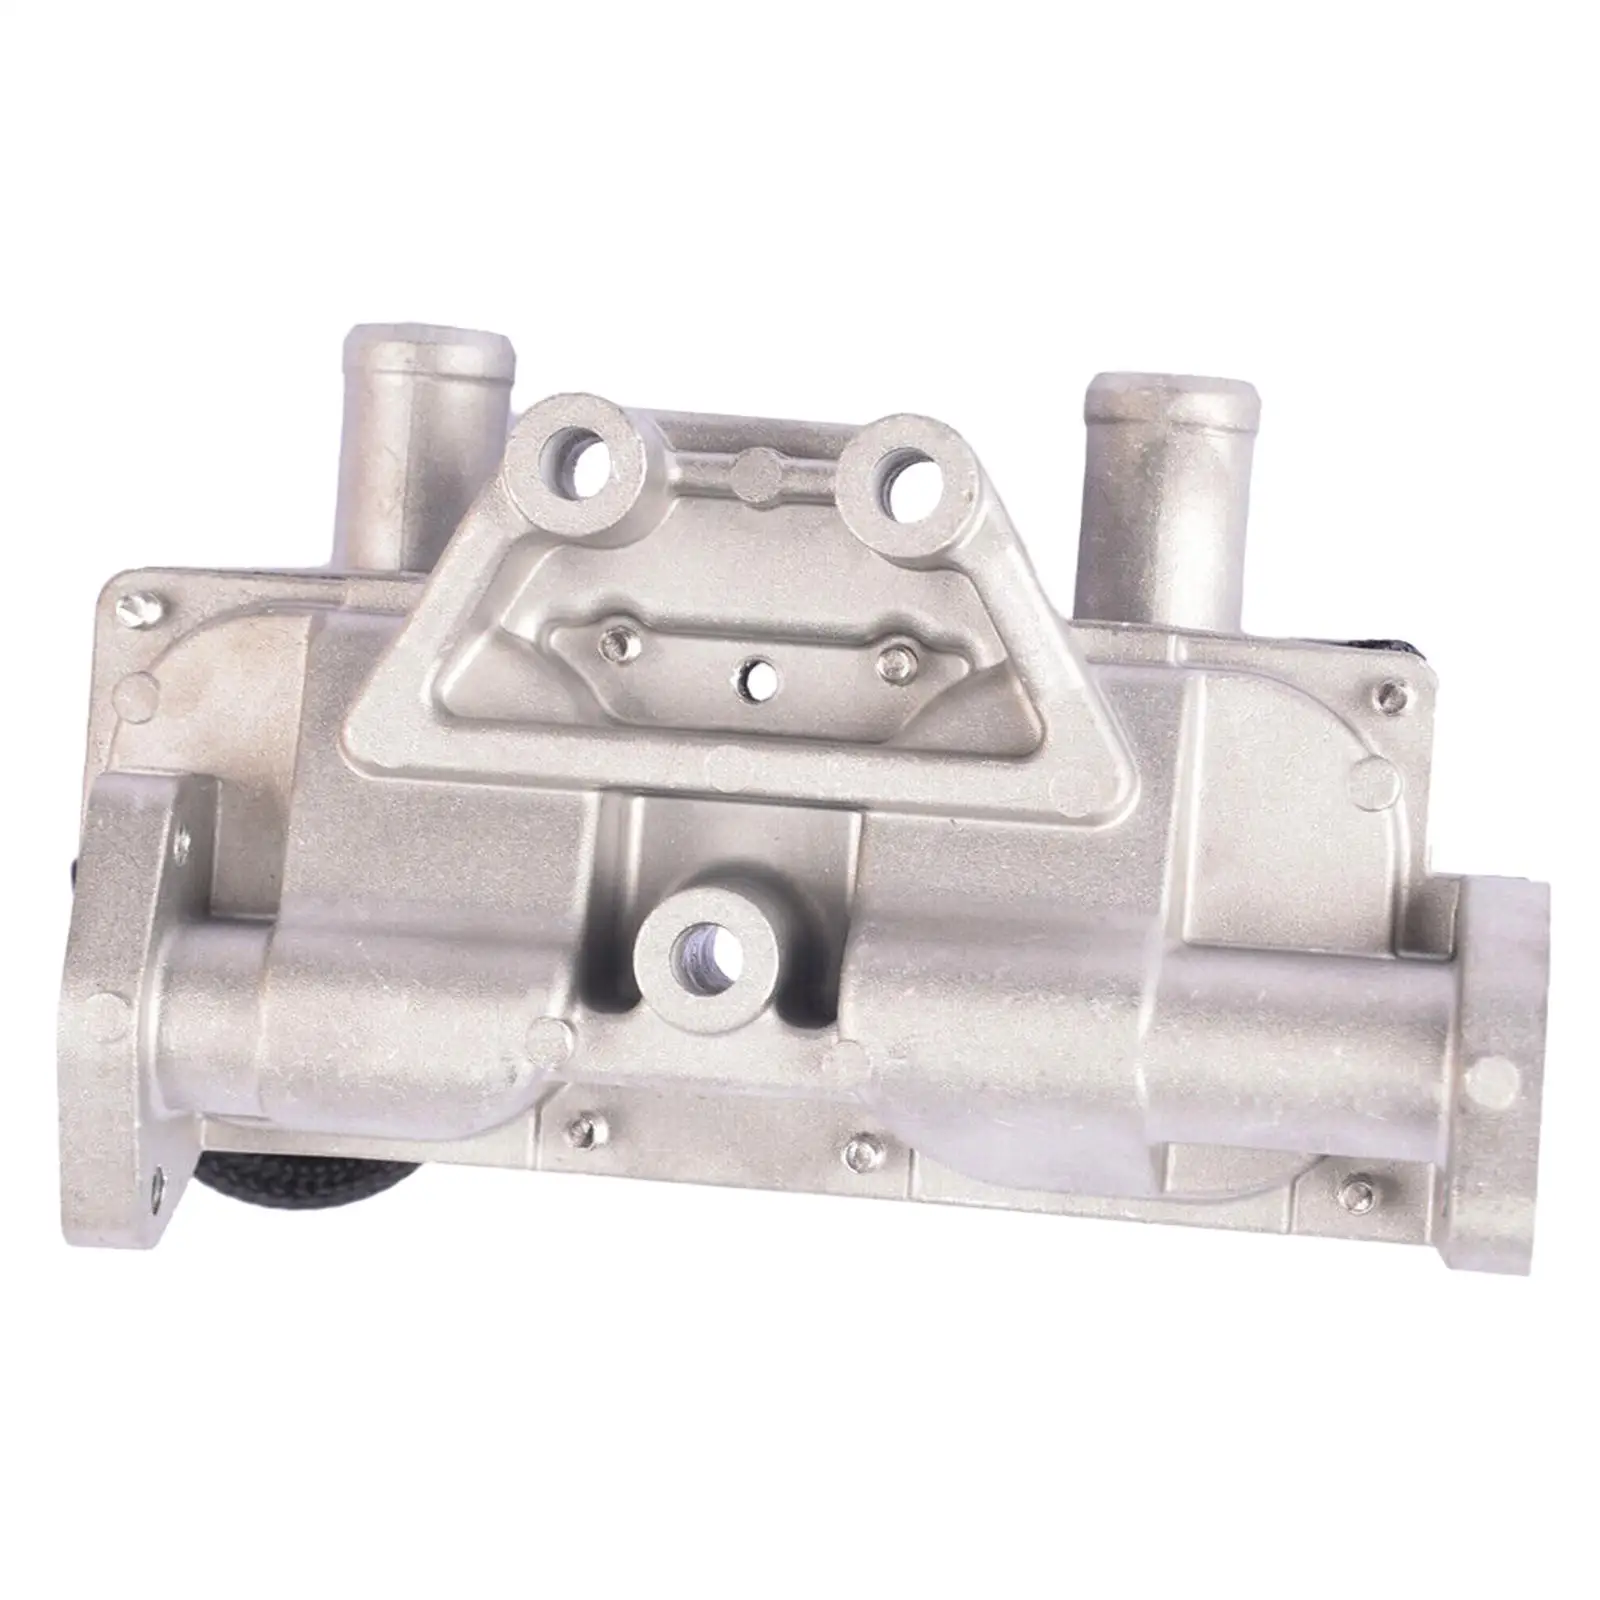 Secondary Valve 2570138060 Replacement Good performance Easily Install